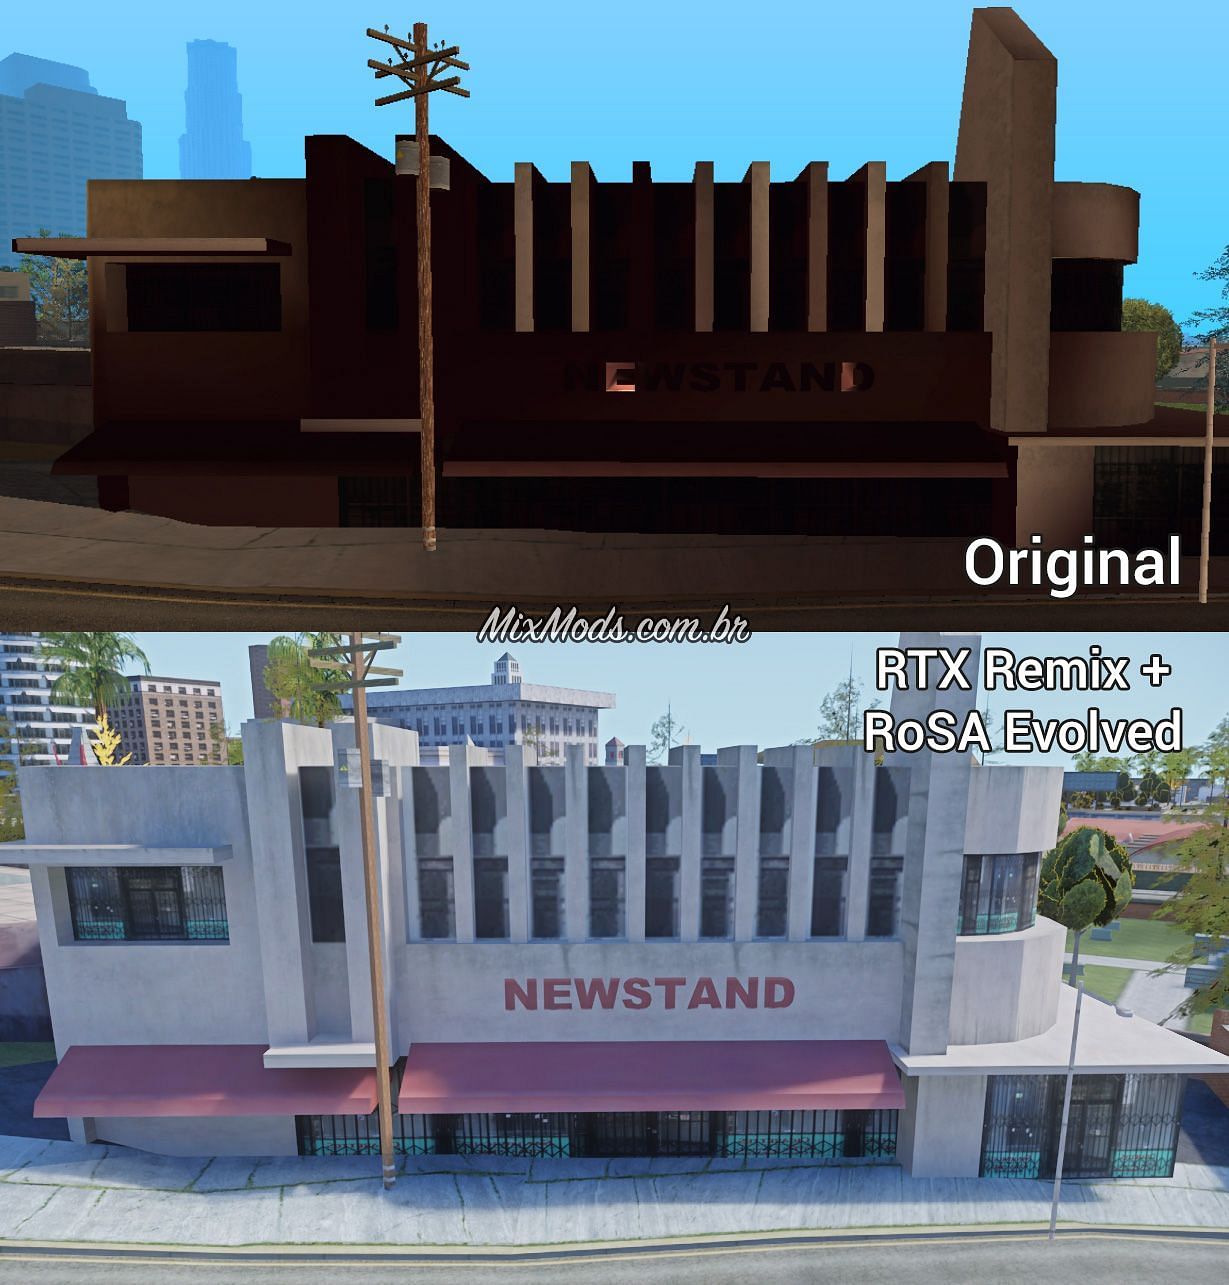 Original graphics is on top, while the modified version with RoSA Evolved is on the bottom (Image via MixMods)